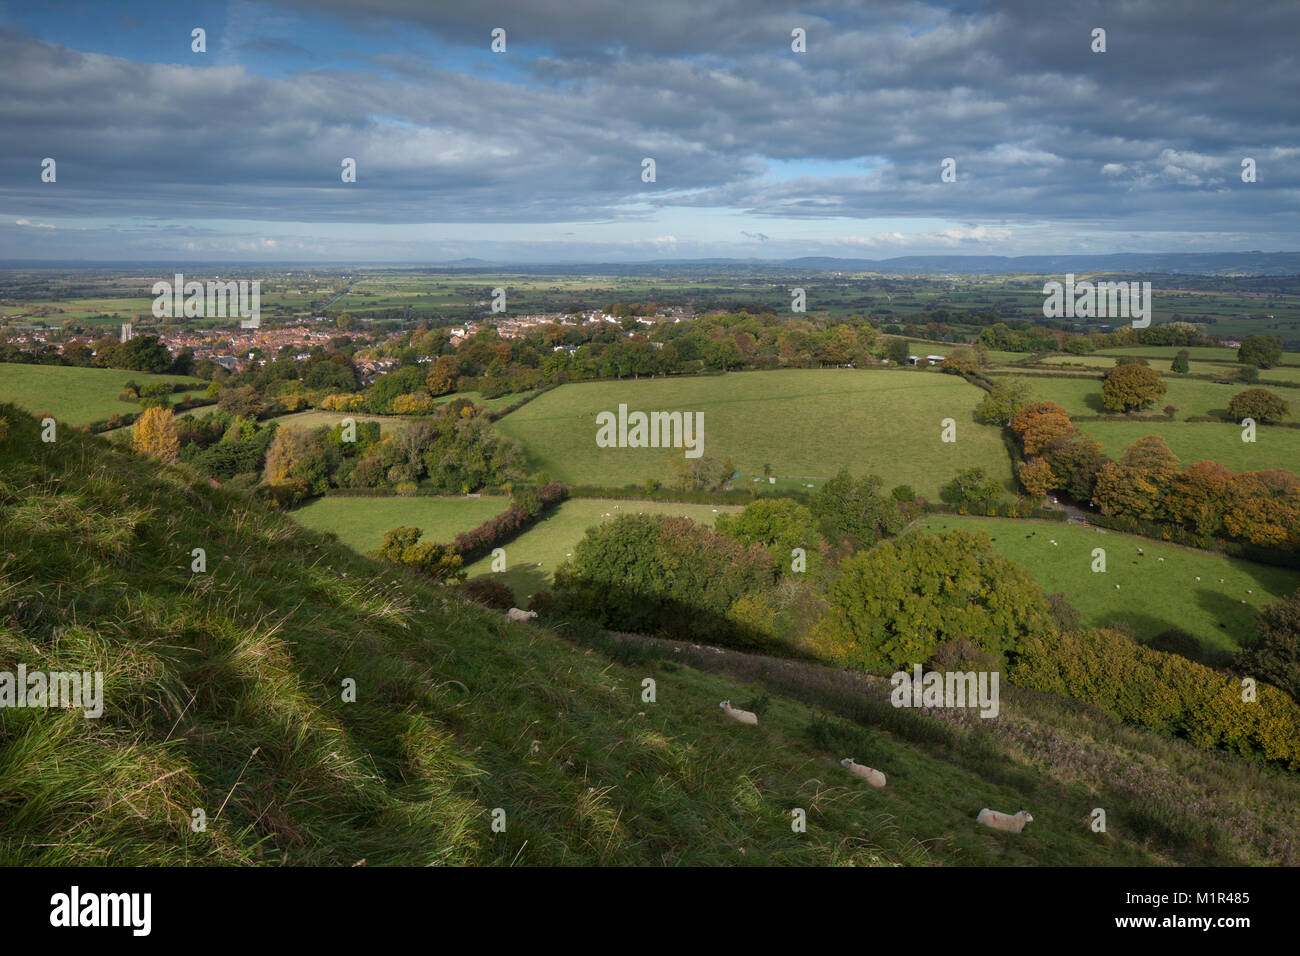 The town of Glastonbury seen from the steep grassy slopes of Glastonbury Tor with the Somerset Levels and Mendip Hills in the distance, Somerset, UK. Stock Photo